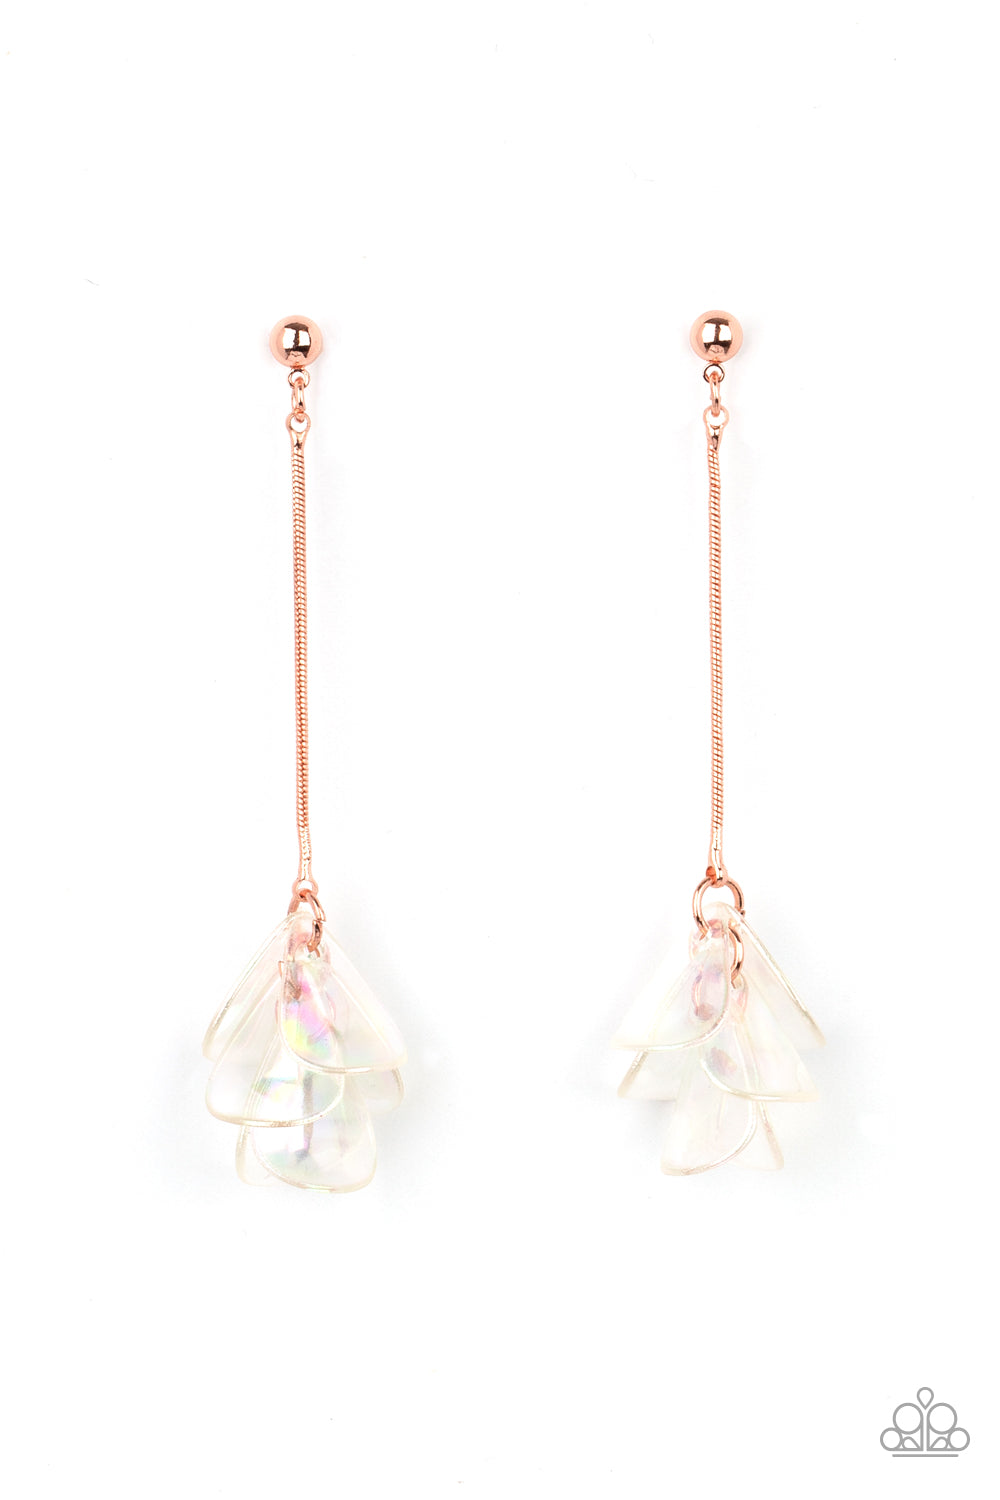 Keep Them In Suspense Copper Post Earring - Paparazzi Accessories  Iridescent acrylic petals delicately cluster at the bottom of a shiny copper chain, creating an ethereal tassel. Earring attaches to a standard post fitting.  All Paparazzi Accessories are lead free and nickel free!  Sold as one pair of post earrings.